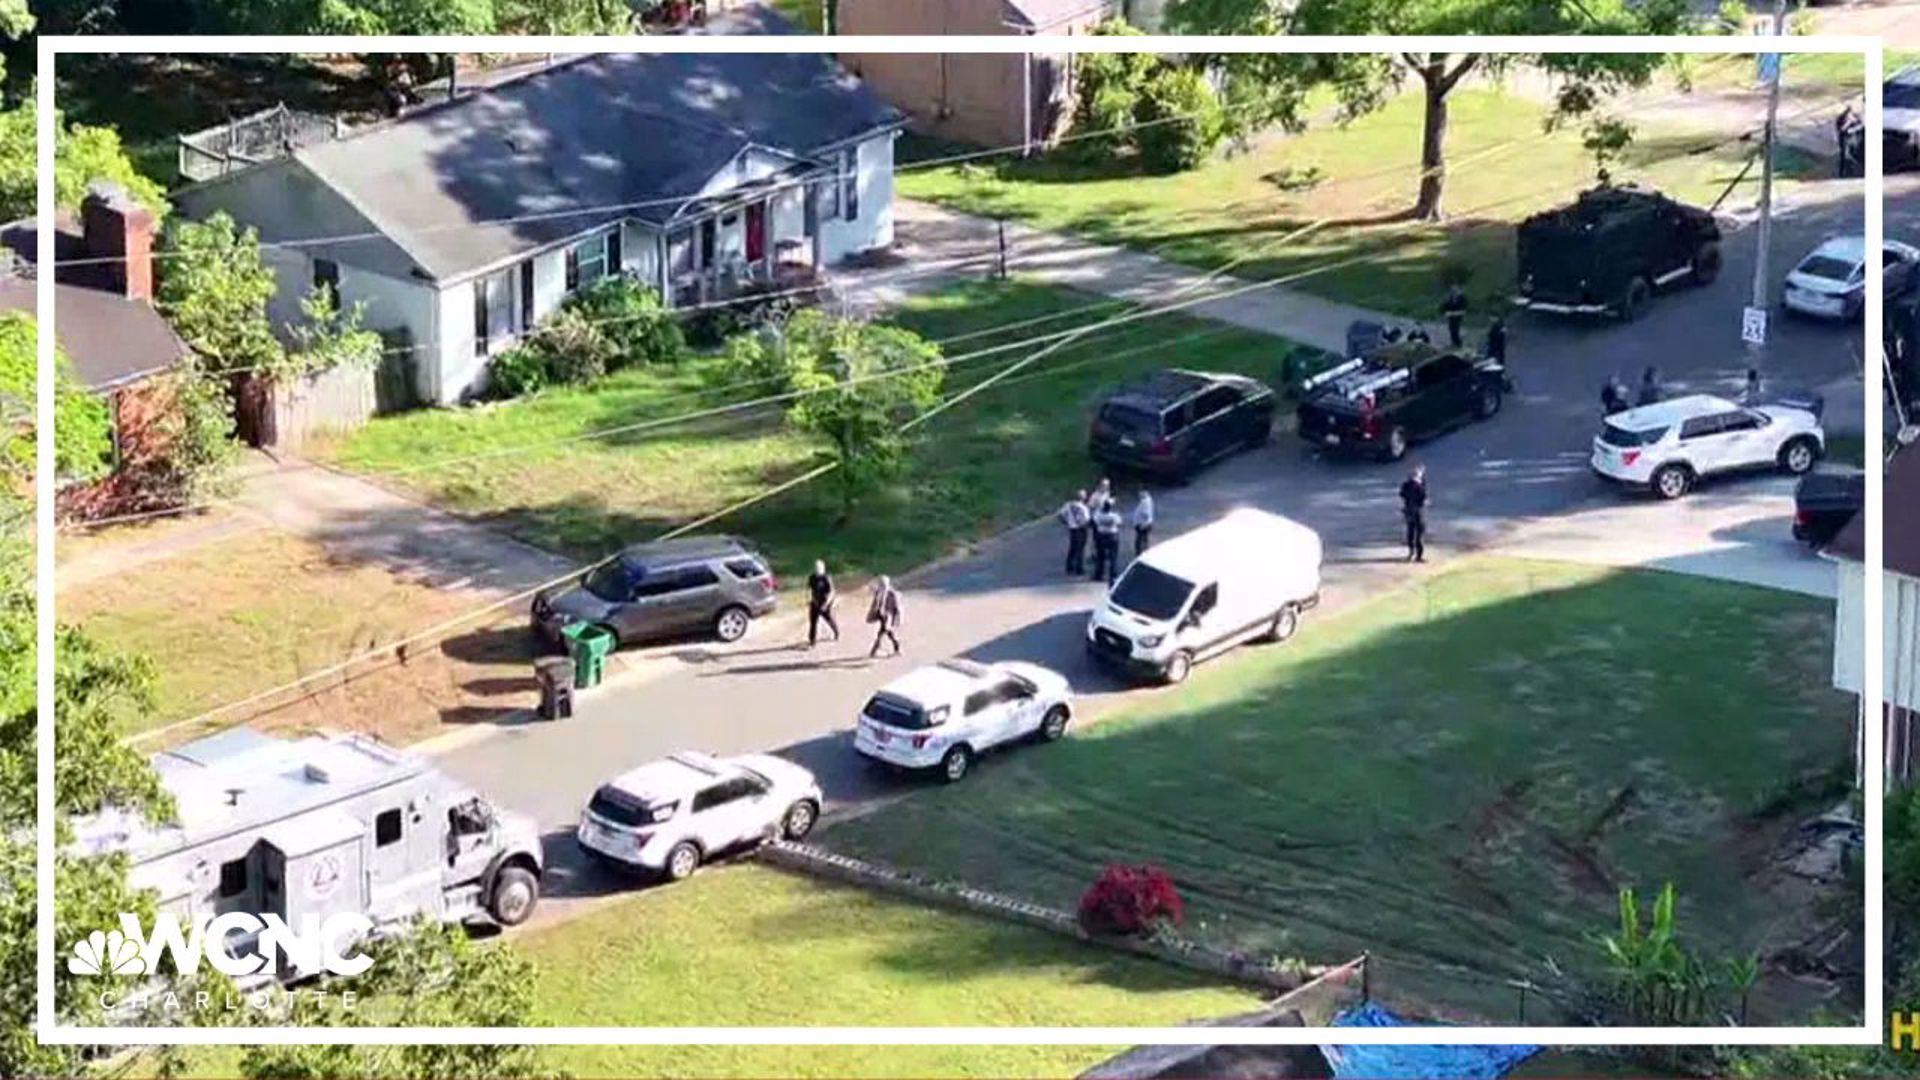 The Charlotte community is mourning after one of the city's darkest days. Three U.S. Marshals and a CMPD officer were killed in an ambush in east Charlotte.